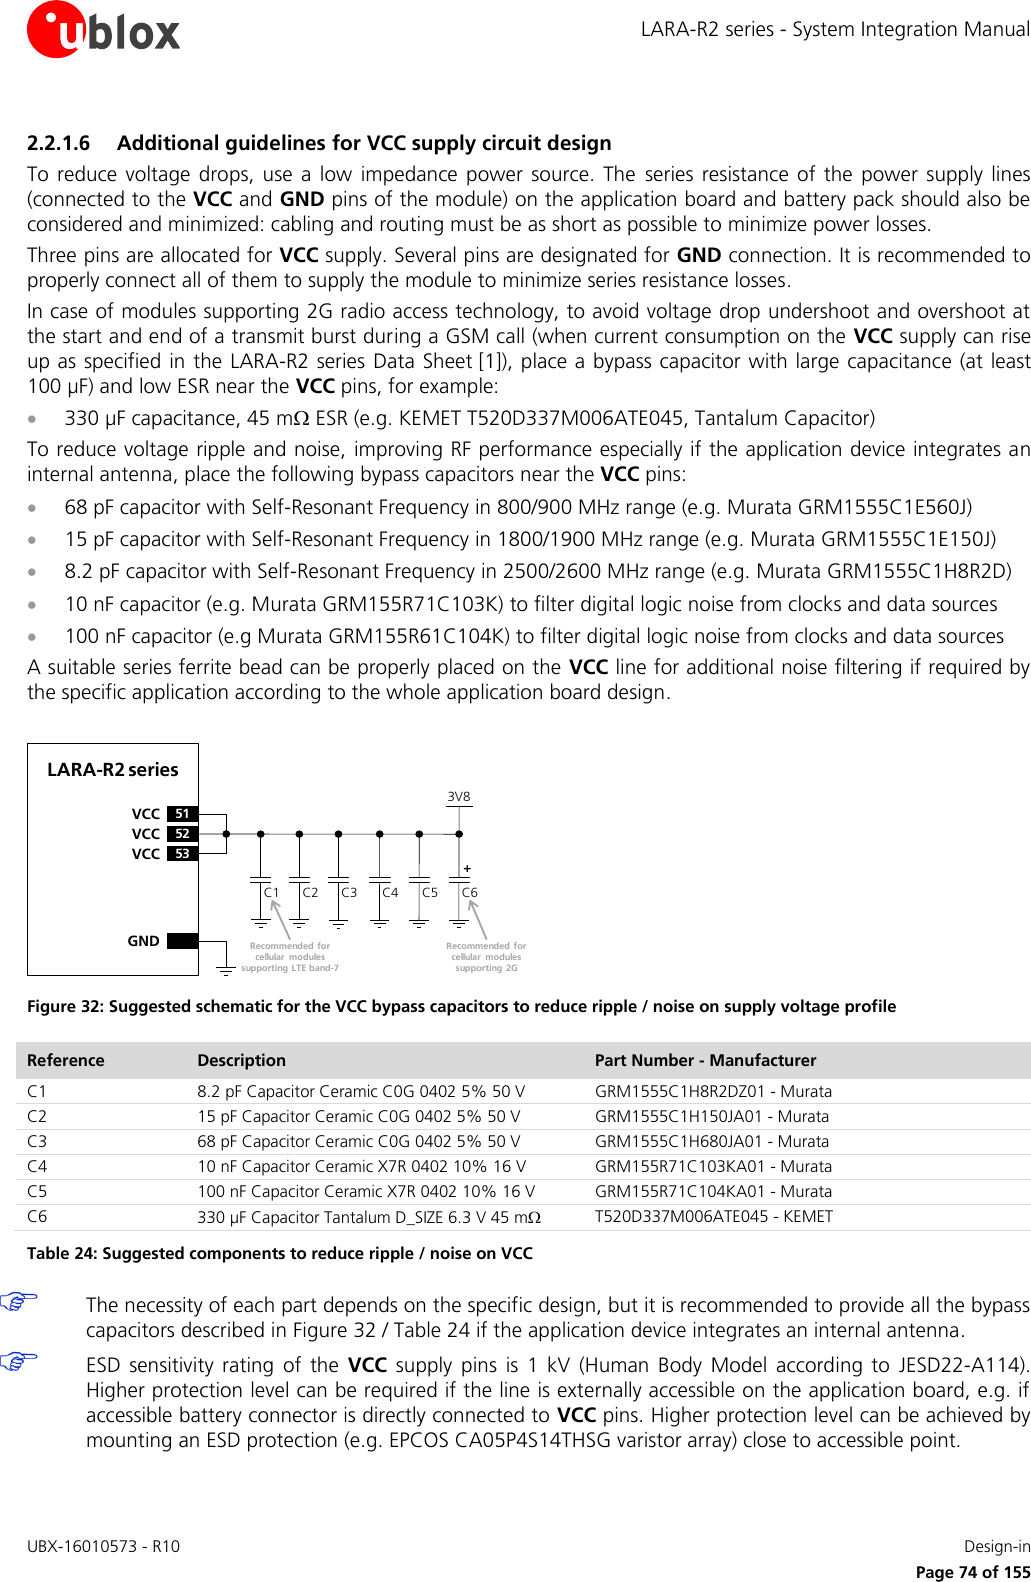 LARA-R2 series - System Integration Manual UBX-16010573 - R10    Design-in     Page 74 of 155 2.2.1.6 Additional guidelines for VCC supply circuit design To reduce  voltage  drops,  use a  low  impedance  power  source.  The  series resistance  of the  power  supply  lines (connected to the VCC and GND pins of the module) on the application board and battery pack should also be considered and minimized: cabling and routing must be as short as possible to minimize power losses. Three pins are allocated for VCC supply. Several pins are designated for GND connection. It is recommended to properly connect all of them to supply the module to minimize series resistance losses. In case of modules supporting 2G radio access technology, to avoid voltage drop undershoot and overshoot at the start and end of a transmit burst during a GSM call (when current consumption on the VCC supply can rise up as specified in the  LARA-R2 series Data Sheet [1]), place a bypass capacitor with large capacitance (at least 100 µF) and low ESR near the VCC pins, for example:  330 µF capacitance, 45 m ESR (e.g. KEMET T520D337M006ATE045, Tantalum Capacitor) To reduce voltage ripple and noise, improving RF performance especially if the application device integrates an internal antenna, place the following bypass capacitors near the VCC pins:  68 pF capacitor with Self-Resonant Frequency in 800/900 MHz range (e.g. Murata GRM1555C1E560J)   15 pF capacitor with Self-Resonant Frequency in 1800/1900 MHz range (e.g. Murata GRM1555C1E150J)   8.2 pF capacitor with Self-Resonant Frequency in 2500/2600 MHz range (e.g. Murata GRM1555C1H8R2D)  10 nF capacitor (e.g. Murata GRM155R71C103K) to filter digital logic noise from clocks and data sources  100 nF capacitor (e.g Murata GRM155R61C104K) to filter digital logic noise from clocks and data sources A suitable series ferrite bead can be properly placed on the VCC line for additional noise filtering if required by the specific application according to the whole application board design.   C2GNDC3 C4LARA-R2 series52VCC53VCC51VCCC1 C63V8+Recommended for cellular  modules supporting 2GC5Recommended for cellular  modules supporting LTE band-7 Figure 32: Suggested schematic for the VCC bypass capacitors to reduce ripple / noise on supply voltage profile  Reference Description Part Number - Manufacturer C1 8.2 pF Capacitor Ceramic C0G 0402 5% 50 V GRM1555C1H8R2DZ01 - Murata C2 15 pF Capacitor Ceramic C0G 0402 5% 50 V GRM1555C1H150JA01 - Murata C3 68 pF Capacitor Ceramic C0G 0402 5% 50 V GRM1555C1H680JA01 - Murata C4 10 nF Capacitor Ceramic X7R 0402 10% 16 V GRM155R71C103KA01 - Murata C5 100 nF Capacitor Ceramic X7R 0402 10% 16 V GRM155R71C104KA01 - Murata C6 330 µF Capacitor Tantalum D_SIZE 6.3 V 45 m T520D337M006ATE045 - KEMET Table 24: Suggested components to reduce ripple / noise on VCC   The necessity of each part depends on the specific design, but it is recommended to provide all the bypass capacitors described in Figure 32 / Table 24 if the application device integrates an internal antenna.   ESD  sensitivity  rating  of  the  VCC  supply  pins  is  1  kV  (Human  Body  Model  according  to  JESD22-A114). Higher protection level can be required if the line is externally accessible on the application board, e.g. if accessible battery connector is directly connected to VCC pins. Higher protection level can be achieved by mounting an ESD protection (e.g. EPCOS CA05P4S14THSG varistor array) close to accessible point.  